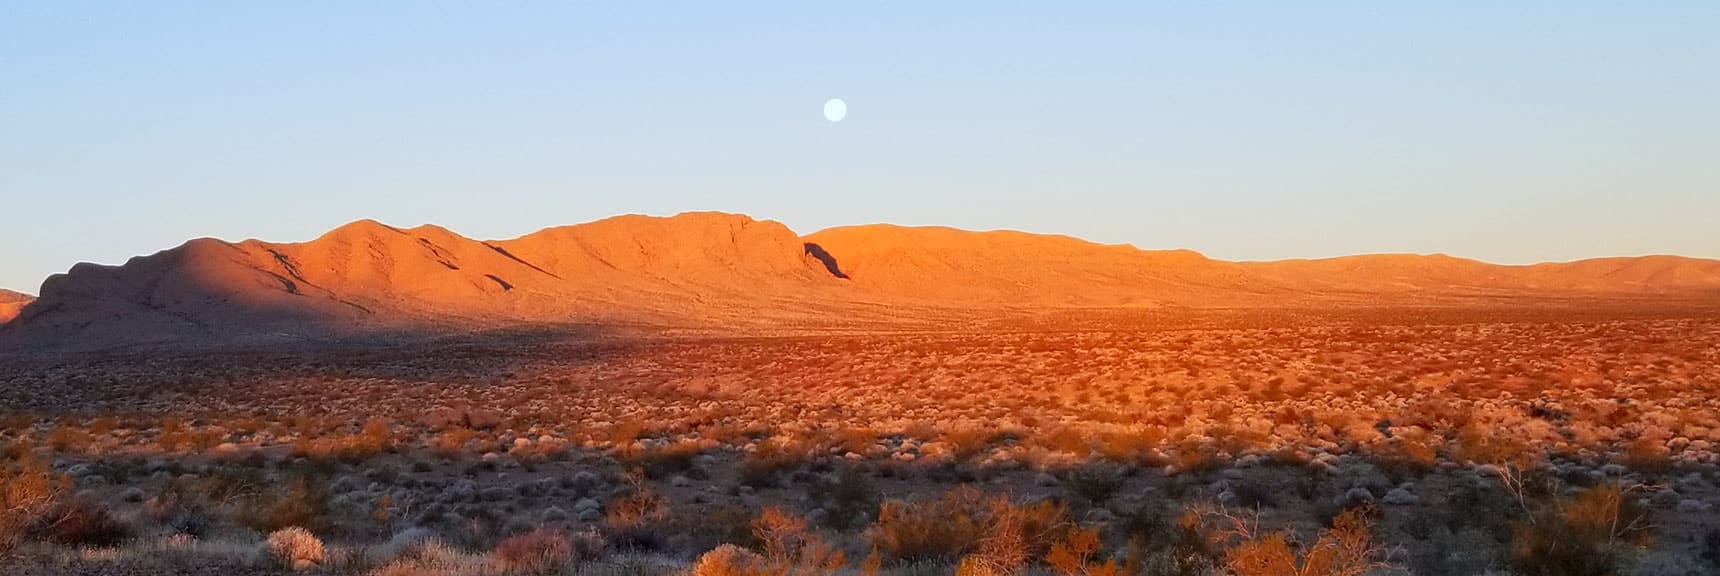 Moonset Seen From the Trailhead for Prospect Trail in Valley of Fire State Park, Nevada